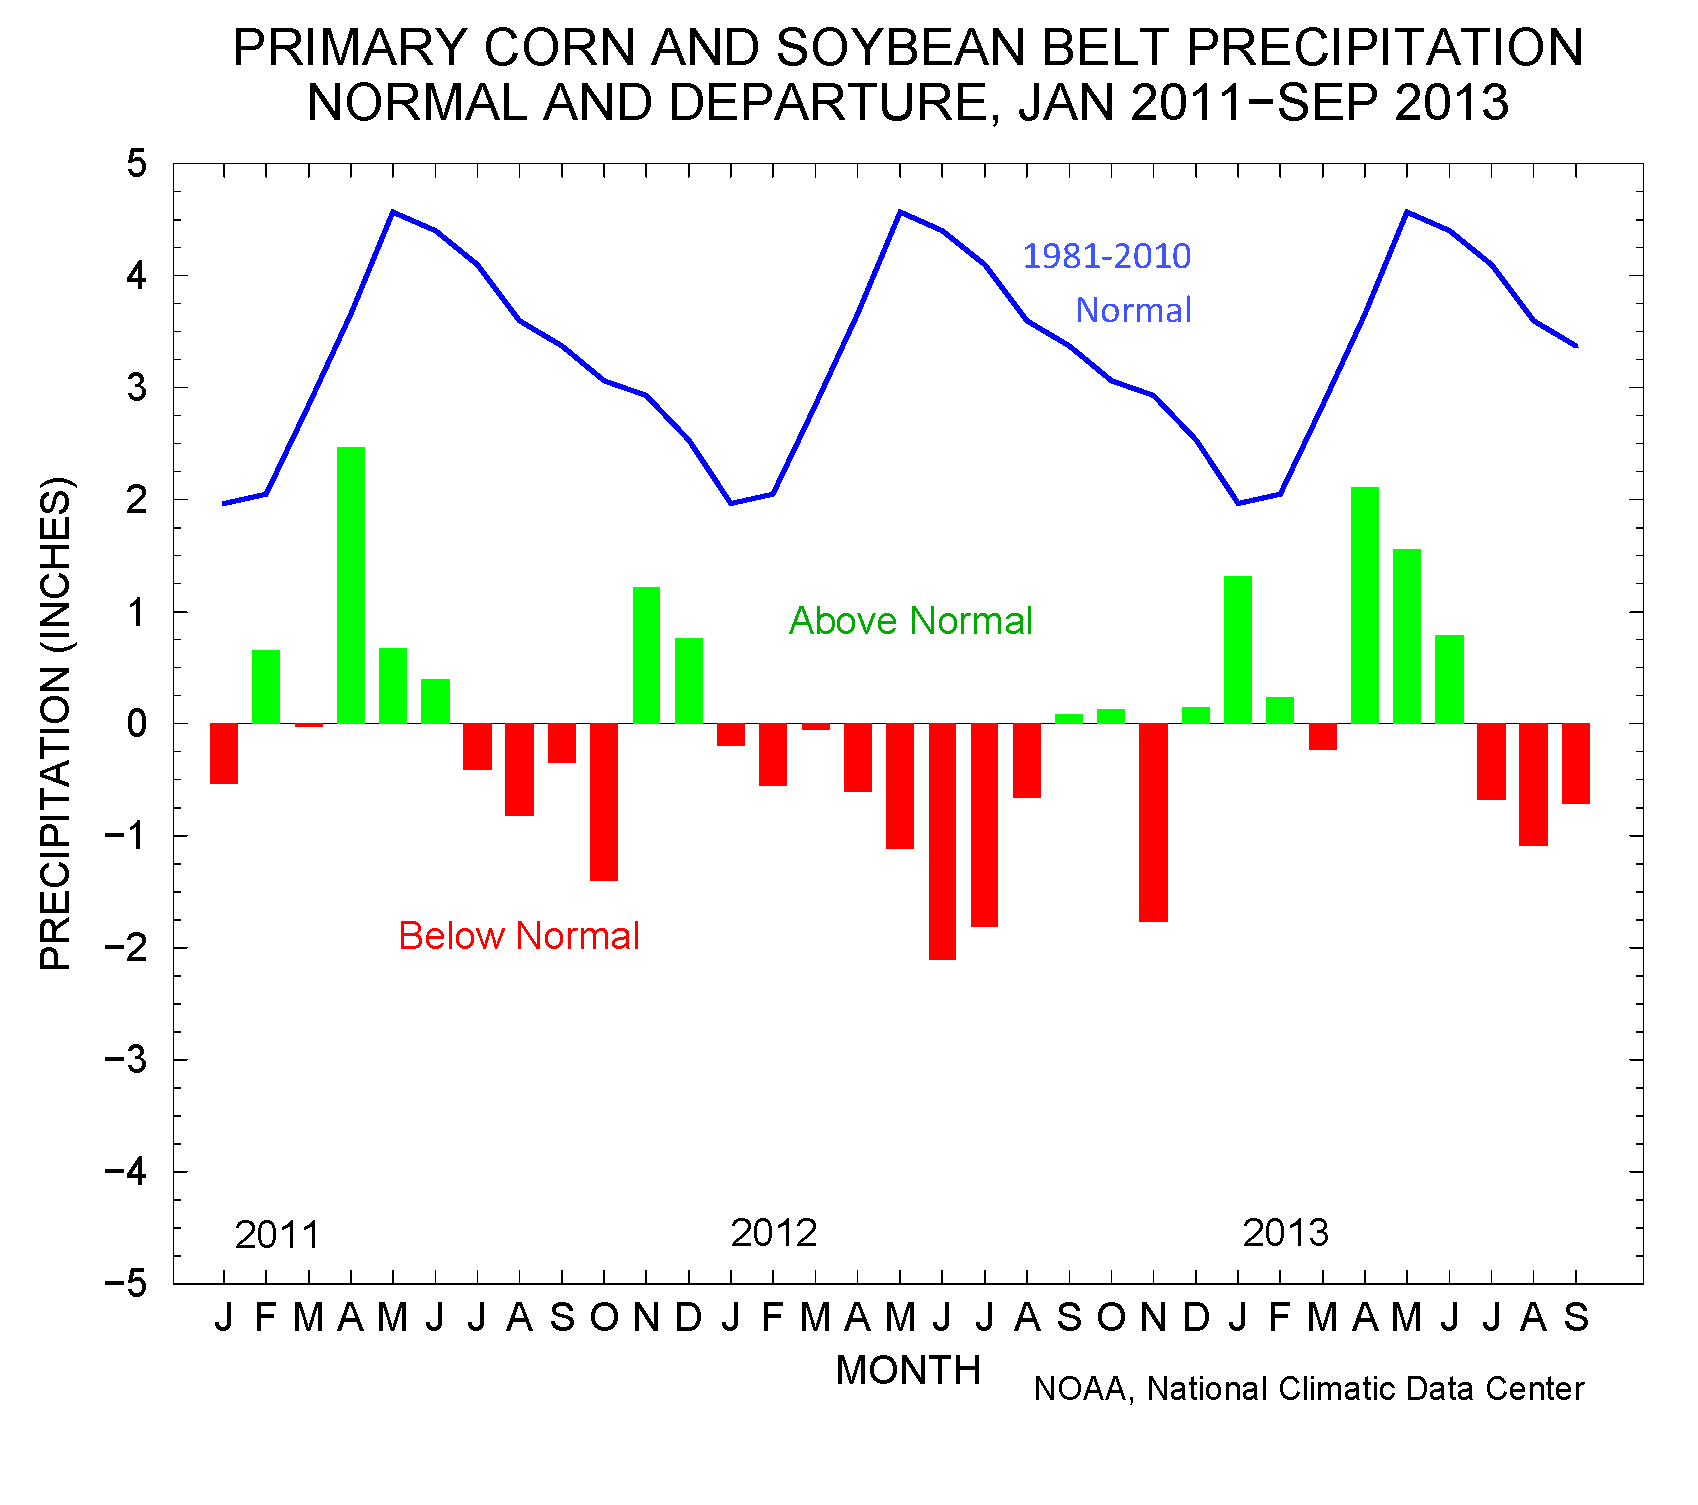 Primary Corn and Soybean Belt precipitation departures, January 2011-September 2013